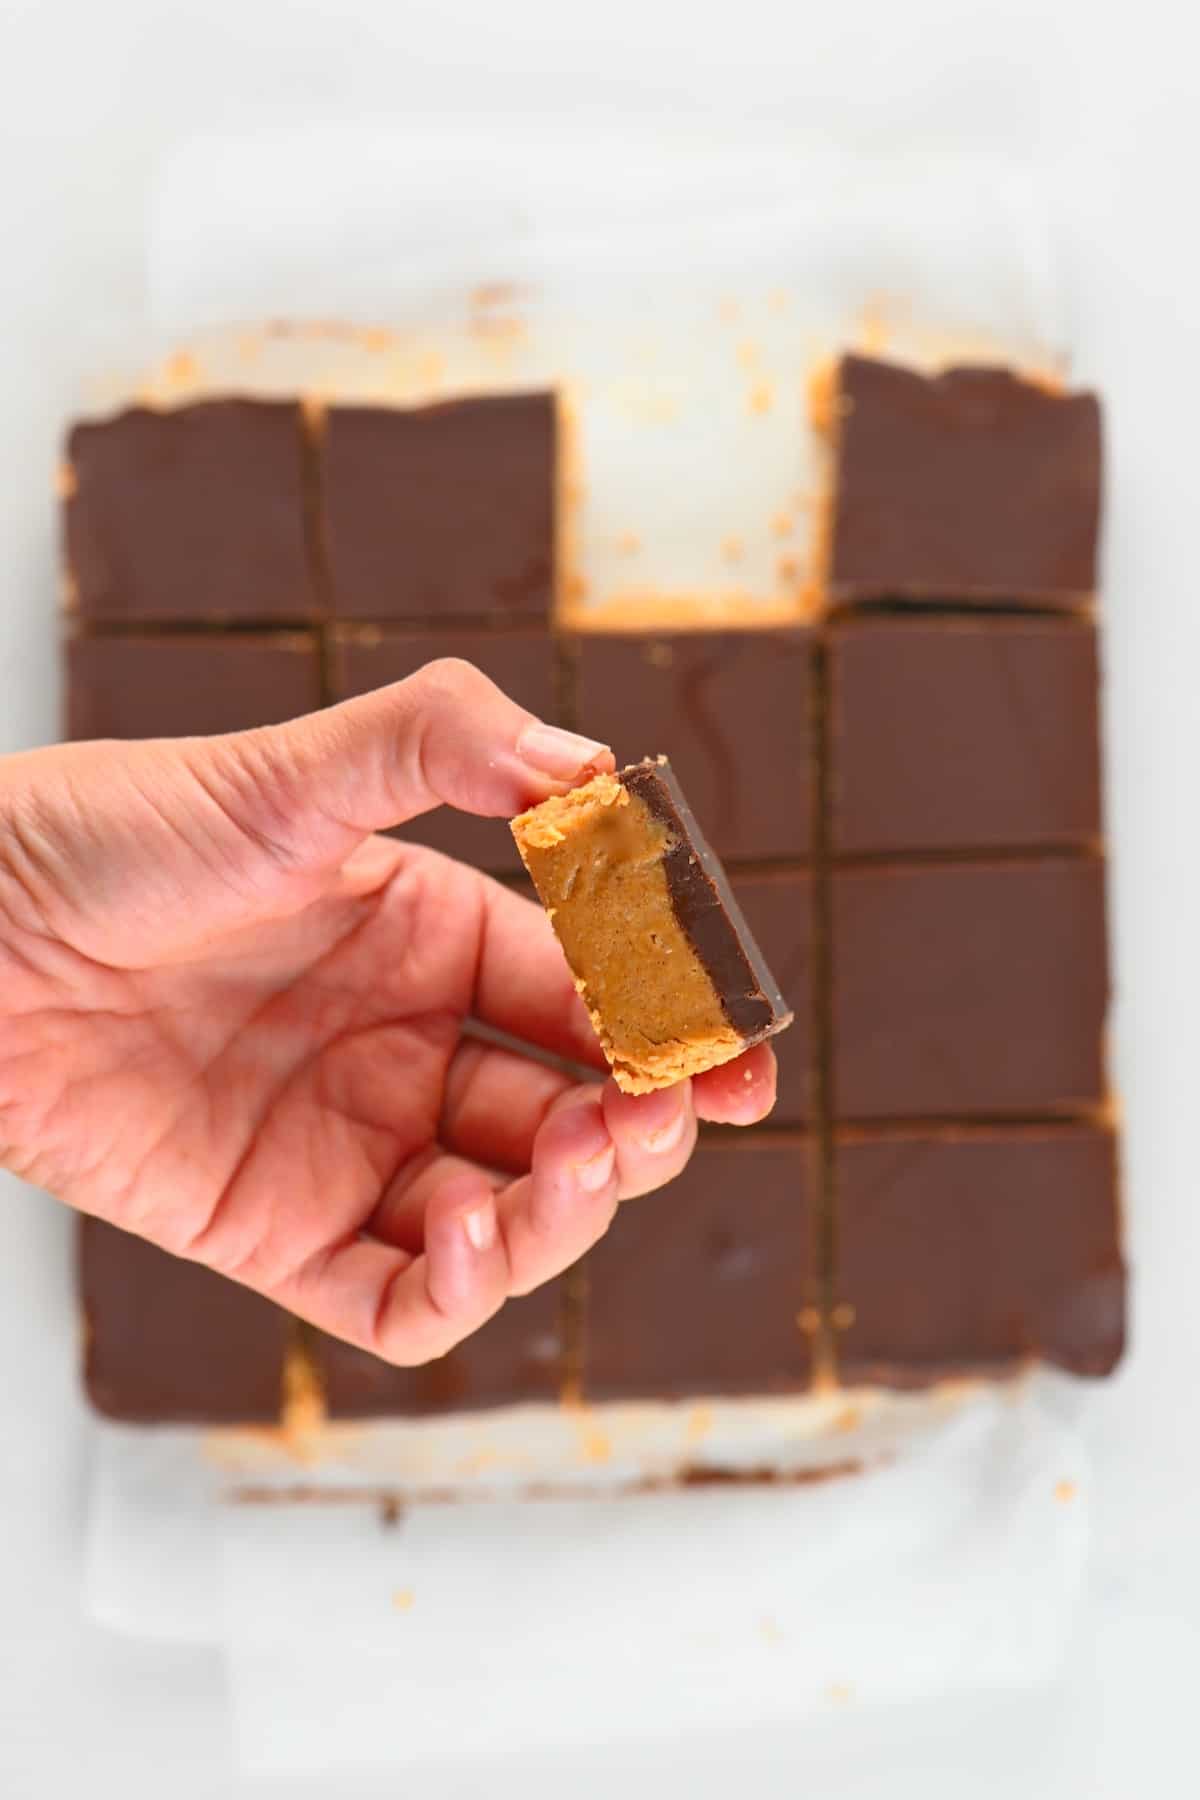 A close up of a square of peanut butter bar